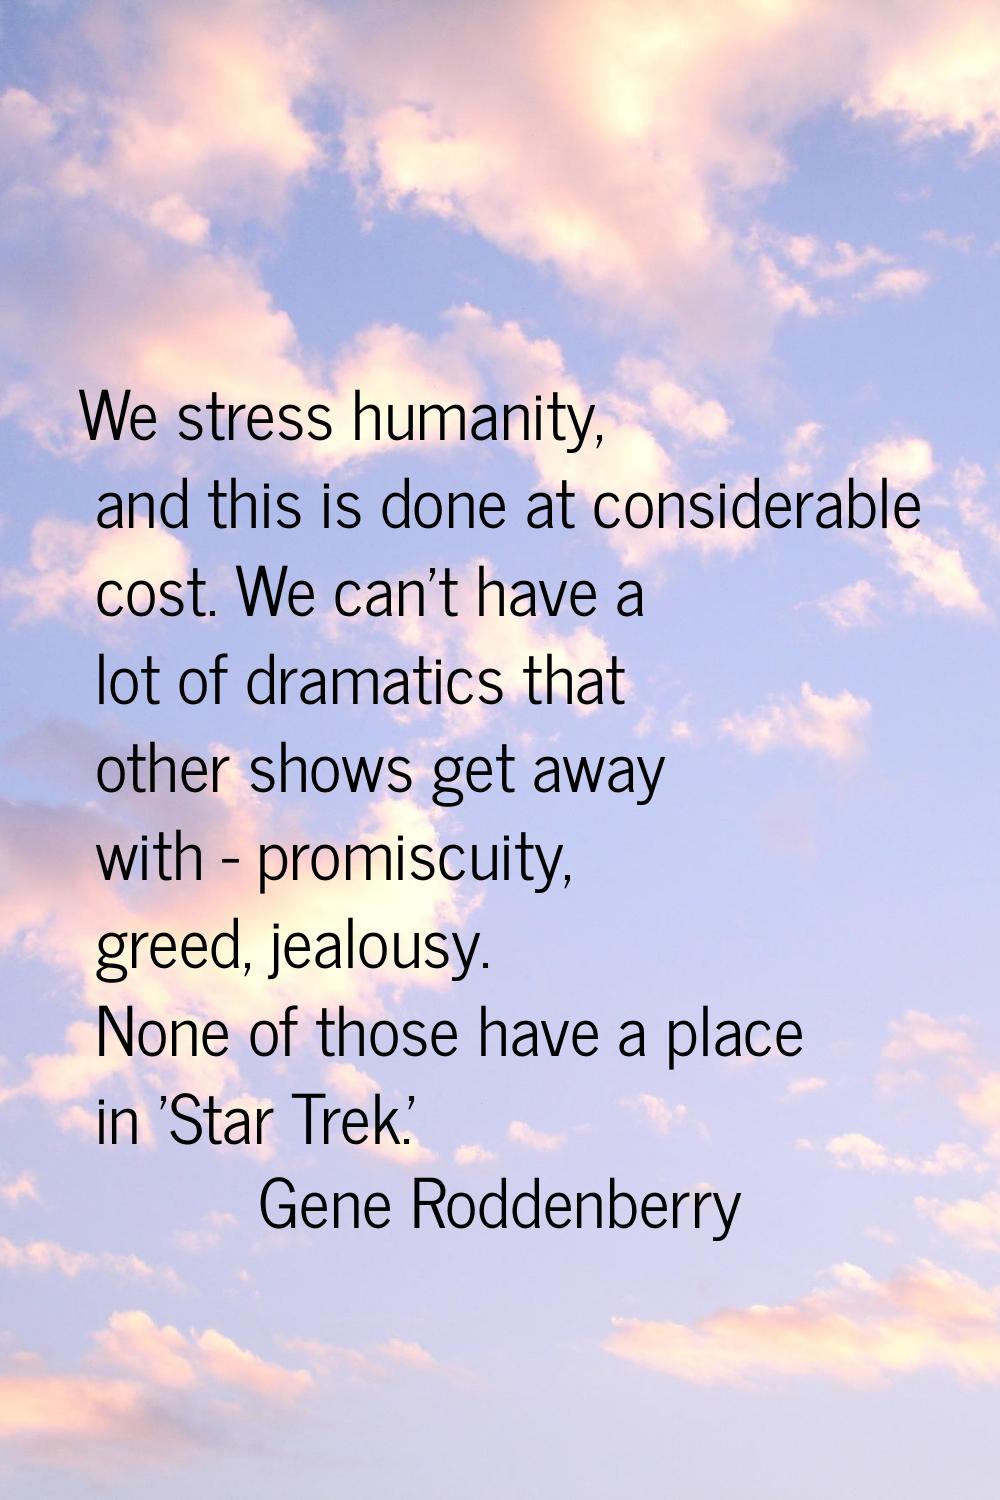 We stress humanity, and this is done at considerable cost. We can't have a lot of dramatics that ot